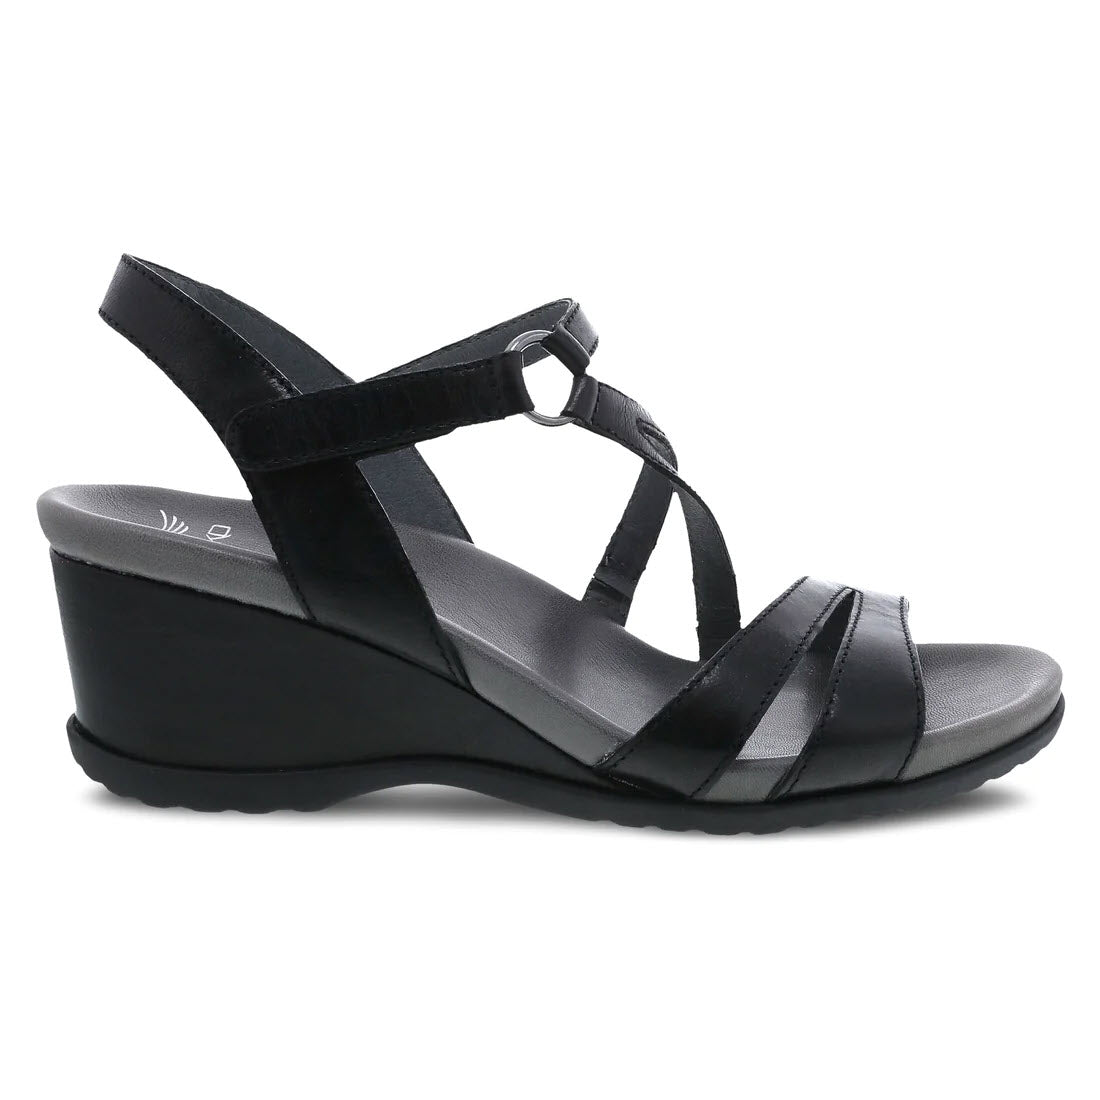 Dansko Addyson glazed black strappy leather wrapped wedge sandal with a hook-and-loop ankle strap and asymmetrical detailing on a white background.